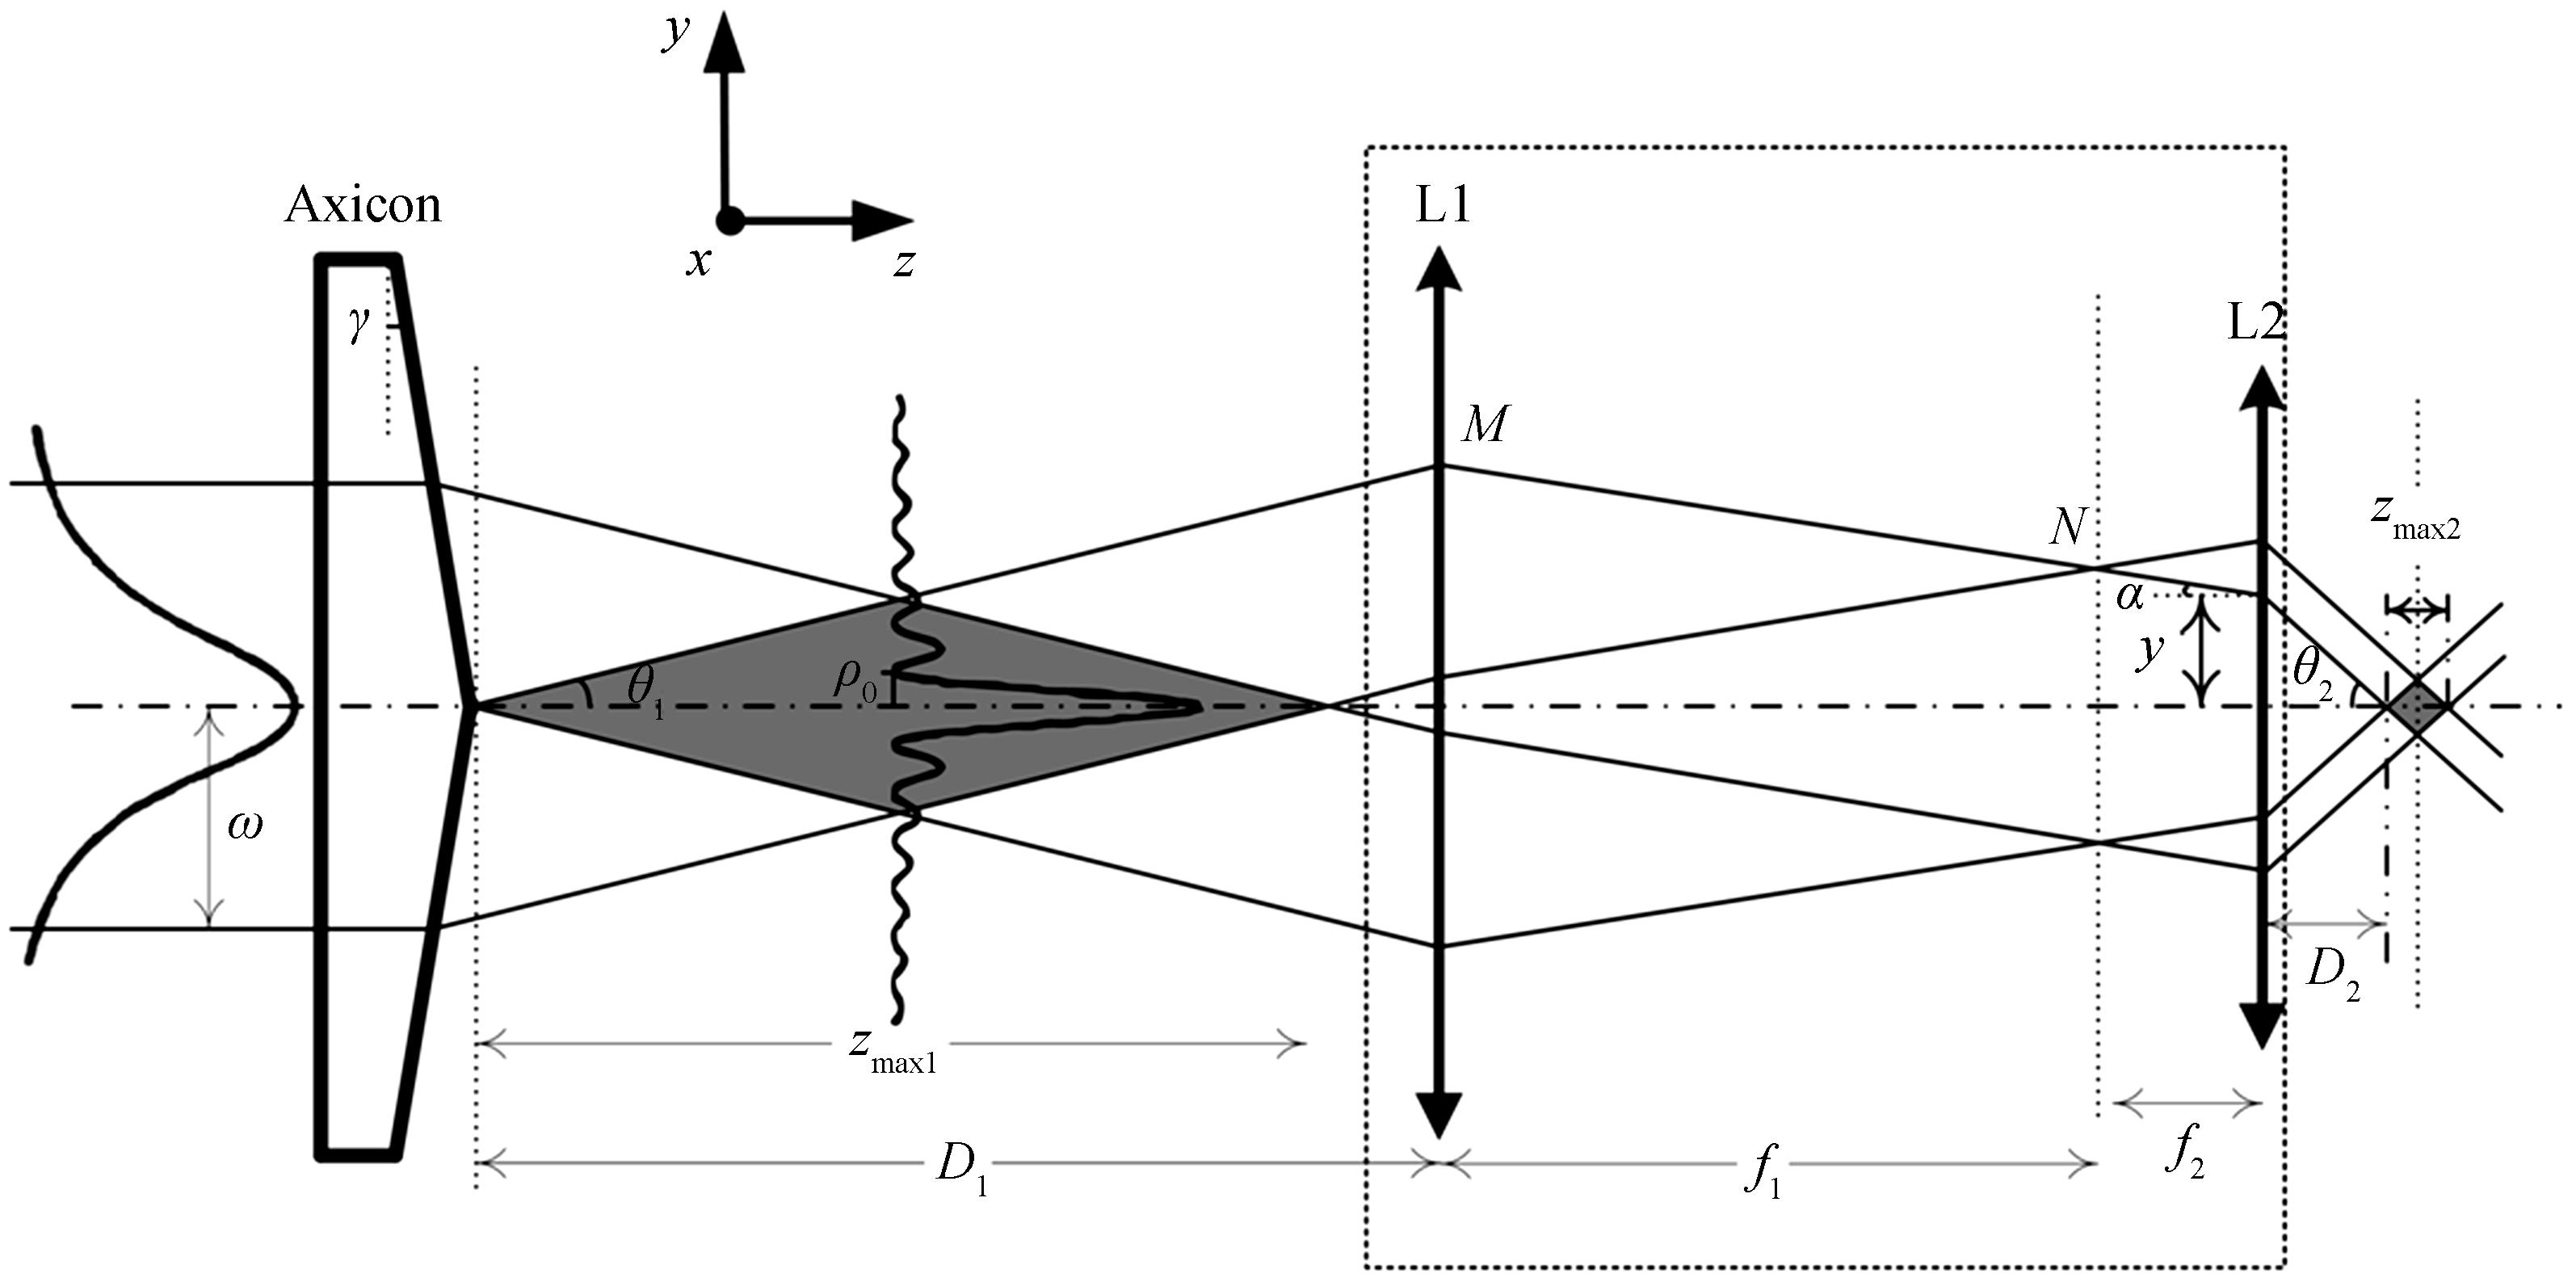 Generation schematic diagram of the Bessel beam using an axicon and a bi-telecentric optical system